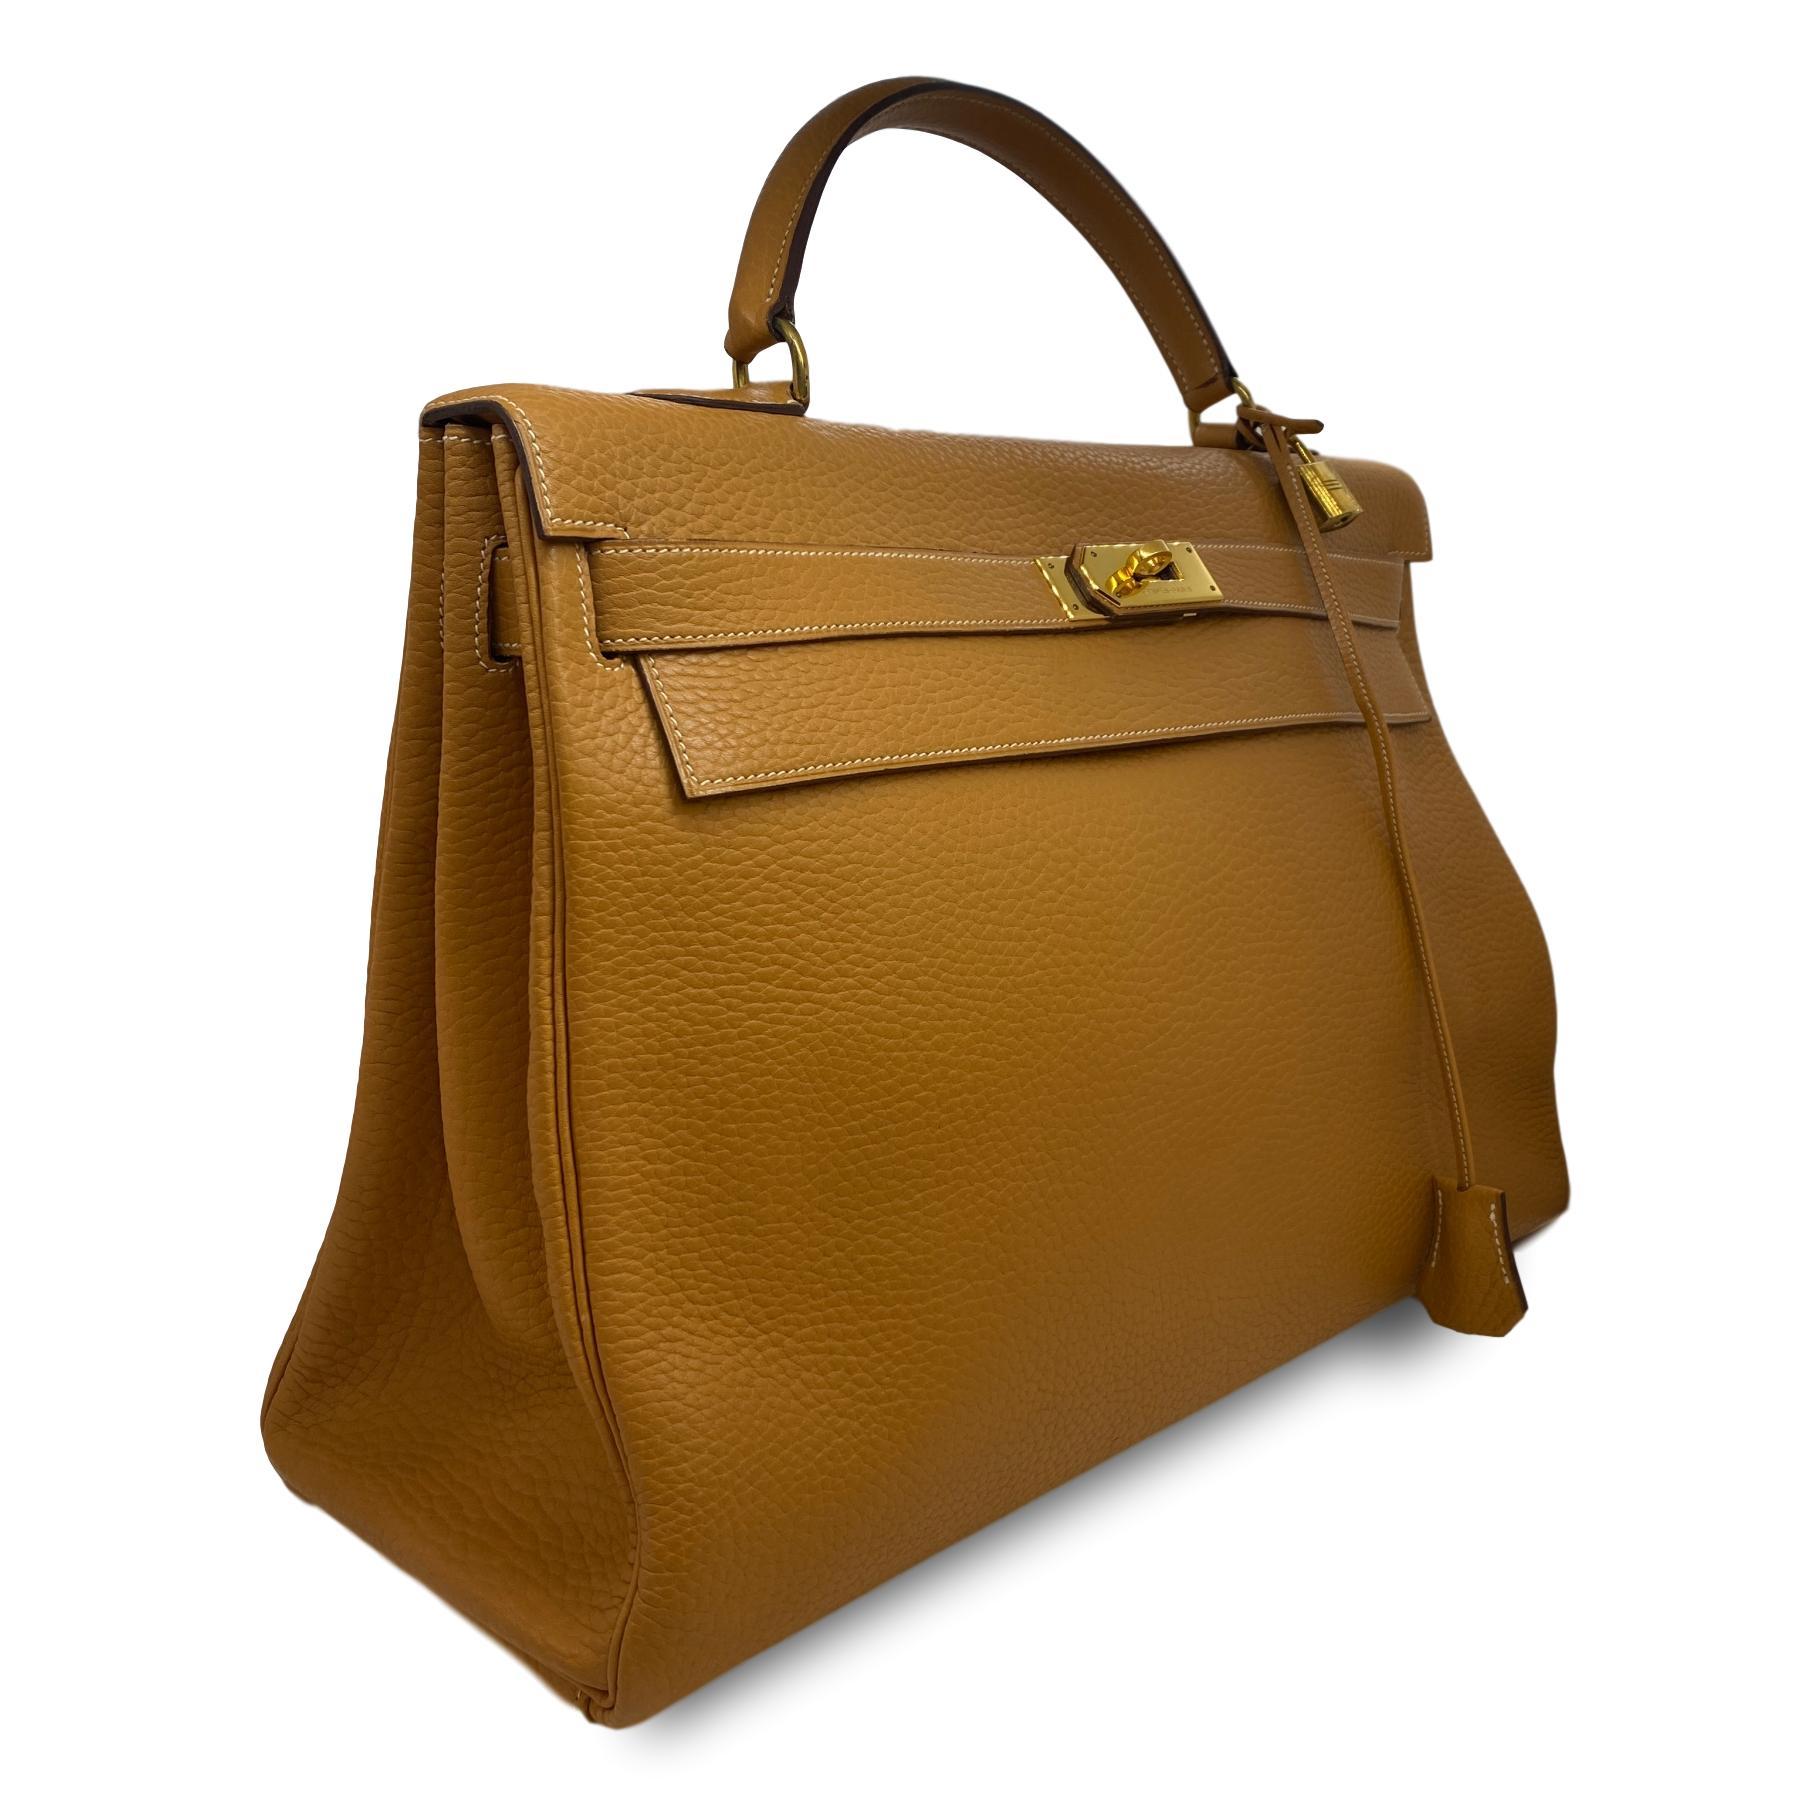 Hermès Kelly Retourne Handbag Gold Fjord Leather with Gold Hardware 40, dated 1985. Hand crafted in France from premium fjord leather with adorning gold plated hardware. Fjord leather, which is still used by the iconic Fashion house today is well